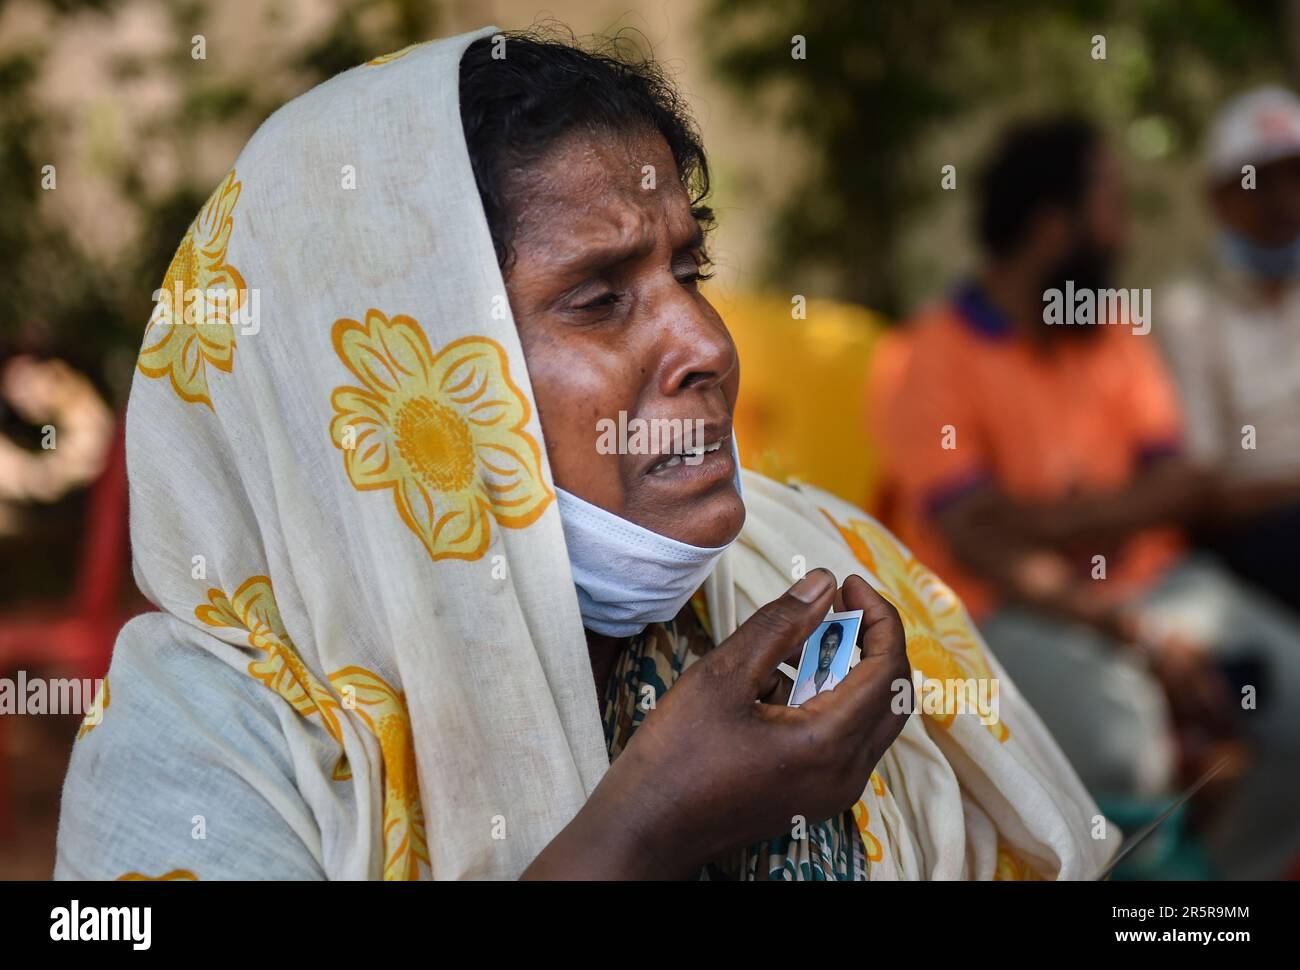 Bhubaneswar, Indian state Odisha. 5th June, 2023. A woman holds a picture of her son, who died in Friday's train accident, at the All India Institute of Medical Sciences (AIIMS) in Bhubaneswar, capital of eastern Indian state Odisha, June 5, 2023. Two passenger trains crashed into a stationary goods train in the Balasore district of Odisha on Friday evening, claiming 275 human lives. Credit: Javed Dar/Xinhua/Alamy Live News Stock Photo